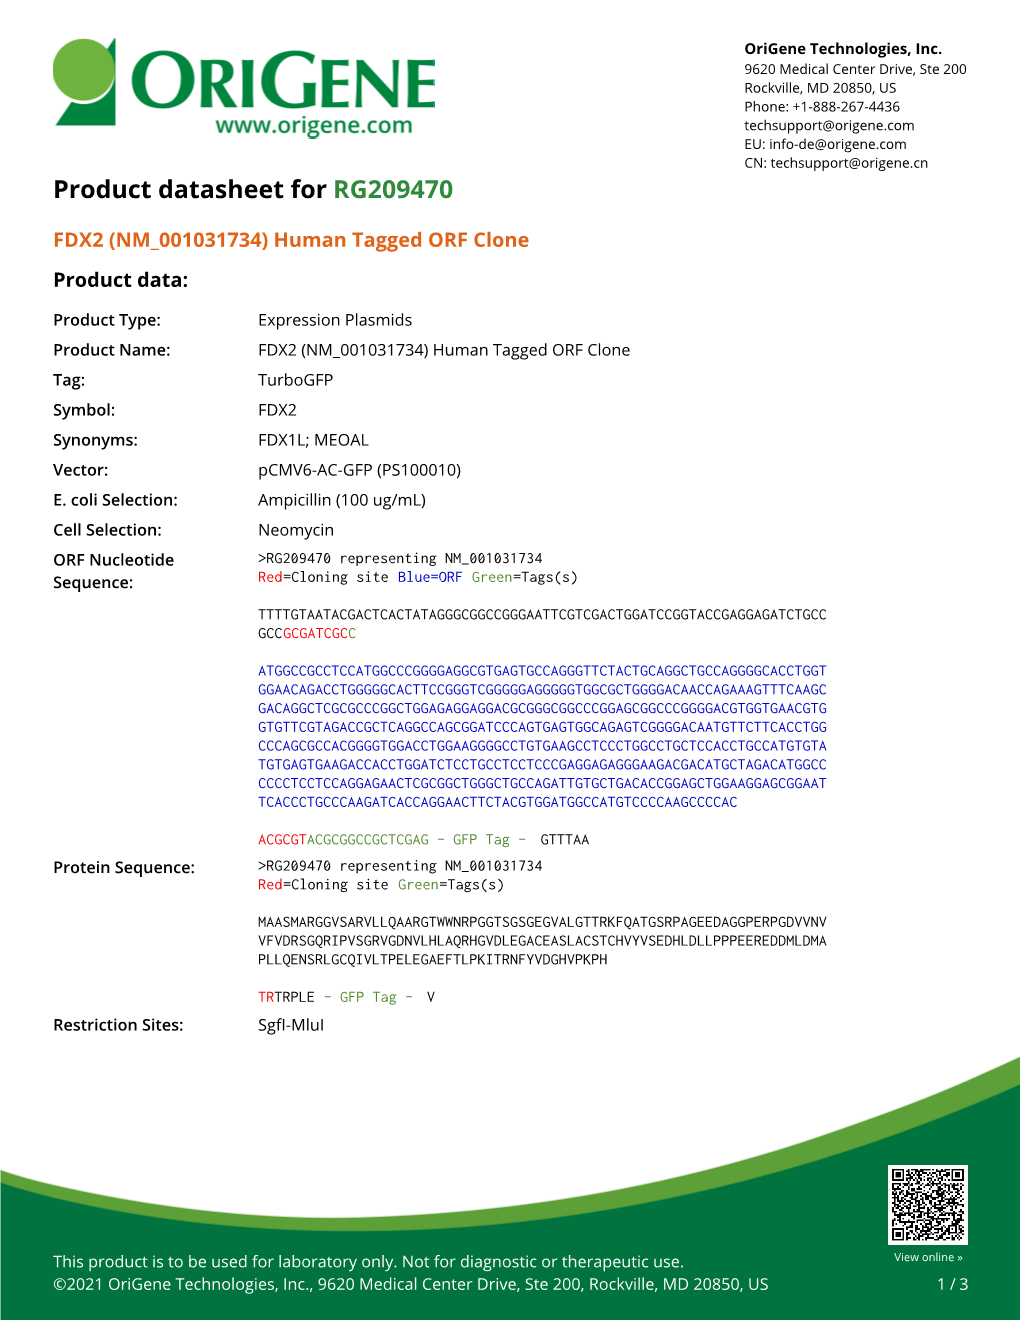 FDX2 (NM 001031734) Human Tagged ORF Clone Product Data